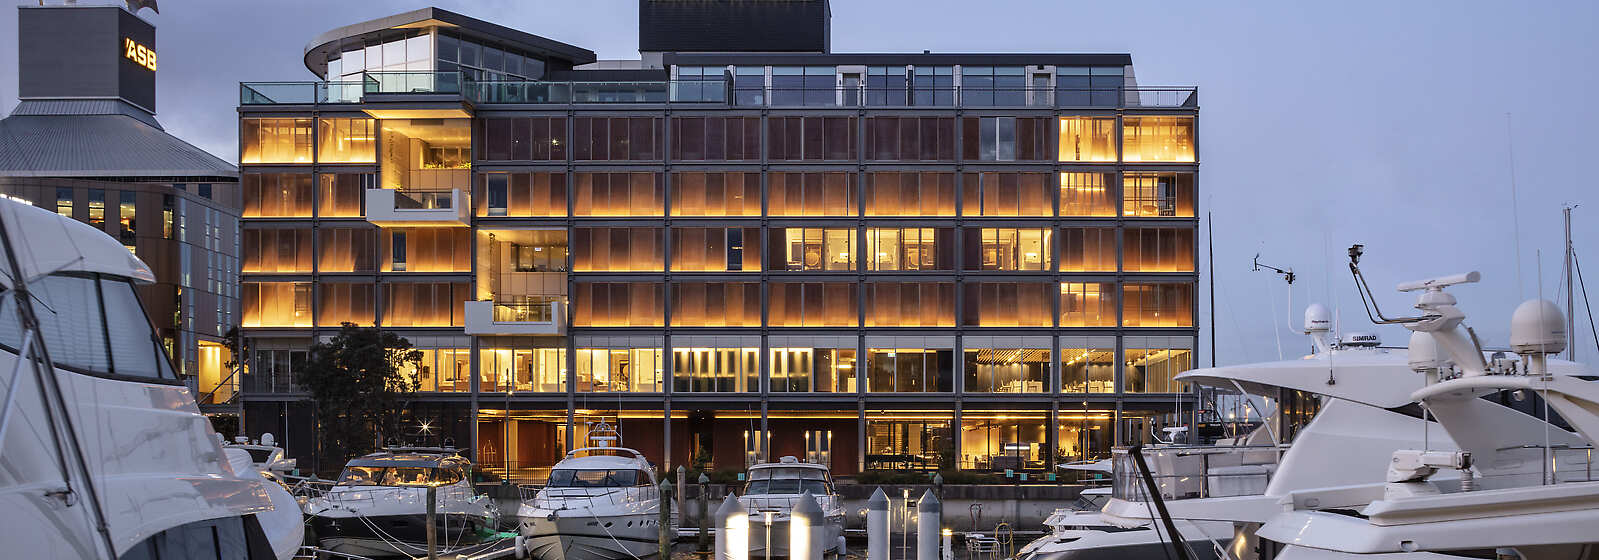 Side view of the exterior of the hotel at dusk. Surrounded by boats in the Viaduct Harbour.